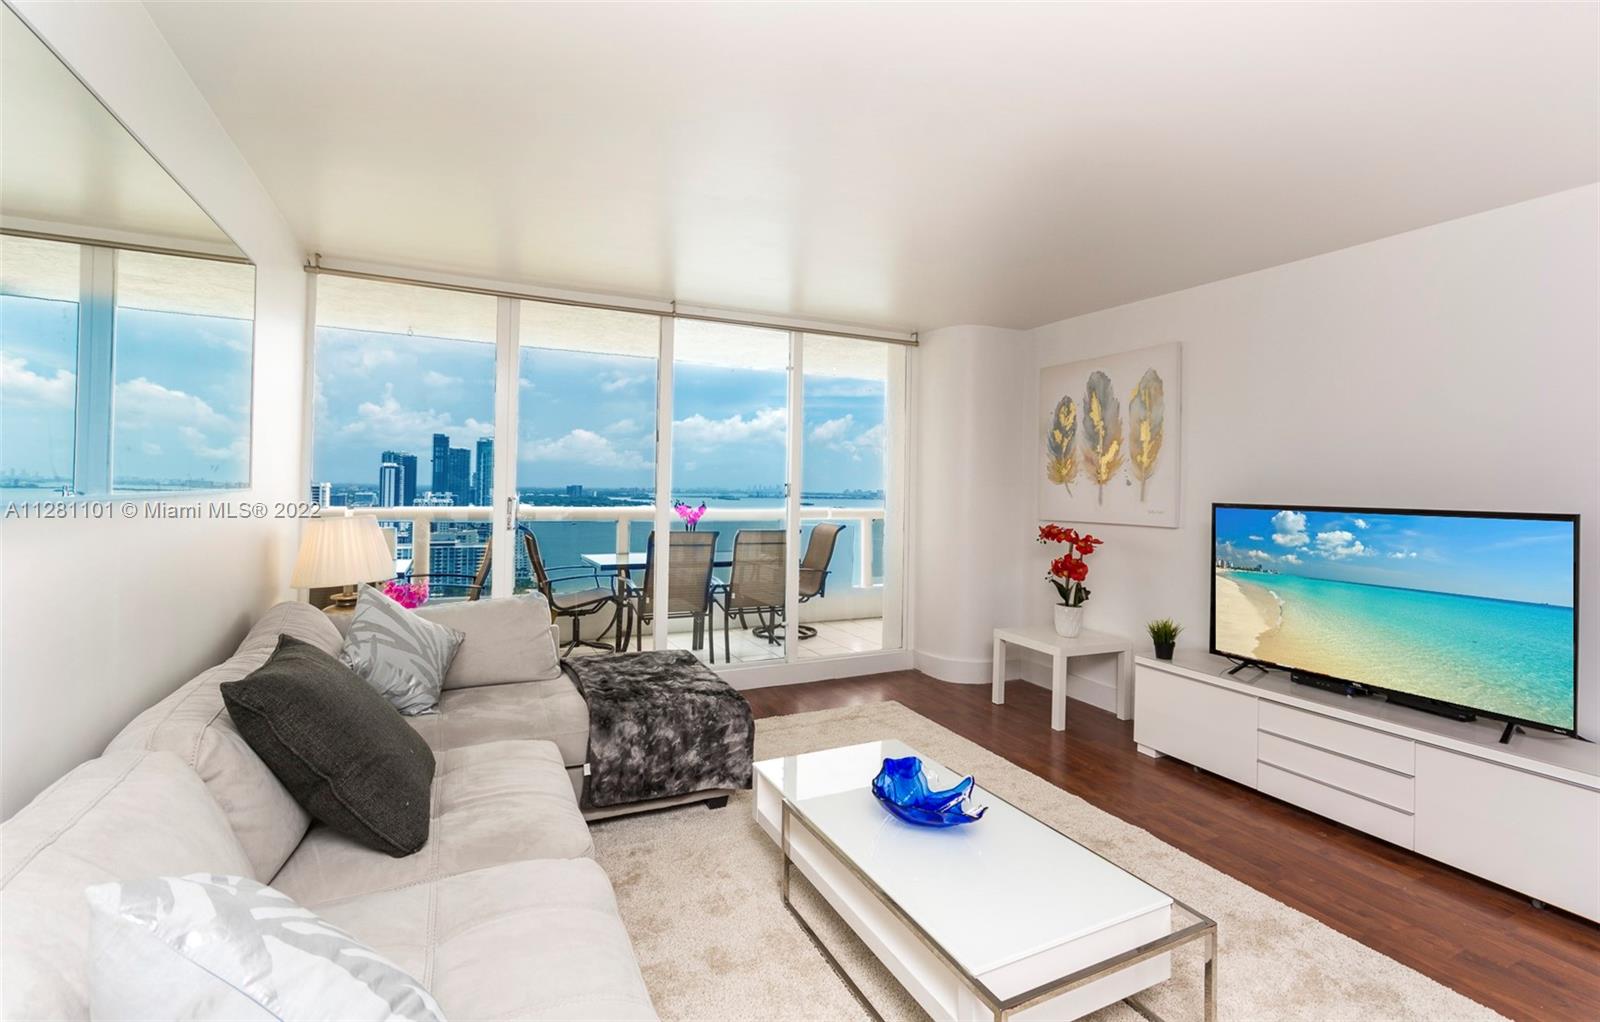 INVESTOR OPPORTUNITY - Monthly rentals or Hotel program - BEST LOCATION FULLY FURNISHED 2BR/2BA upgraded to 3 Beds. AVAILABLE September 1st. Beautiful Bayfront condo in THE GRAND. Located in the heart of Miami exclusive Arts + Entertainment District, just one mile from the Port of Miami, and within walking distance the Adrienne Arsht Center for the Performing Arts, American Airlines Arena and Bayfront Park. Discover the fun, food and shops at Bayside Marketplace or enjoy the proximity to Brickell, Midtown, Design District and Wynwood Arts District. Margaret Pace Park is right next to the building with lighted basketball, tennis and a volleyball courts. Visit Sea Isle Marina & Yachting Center in our backyard and enjoy a scenic charter to South Beach.